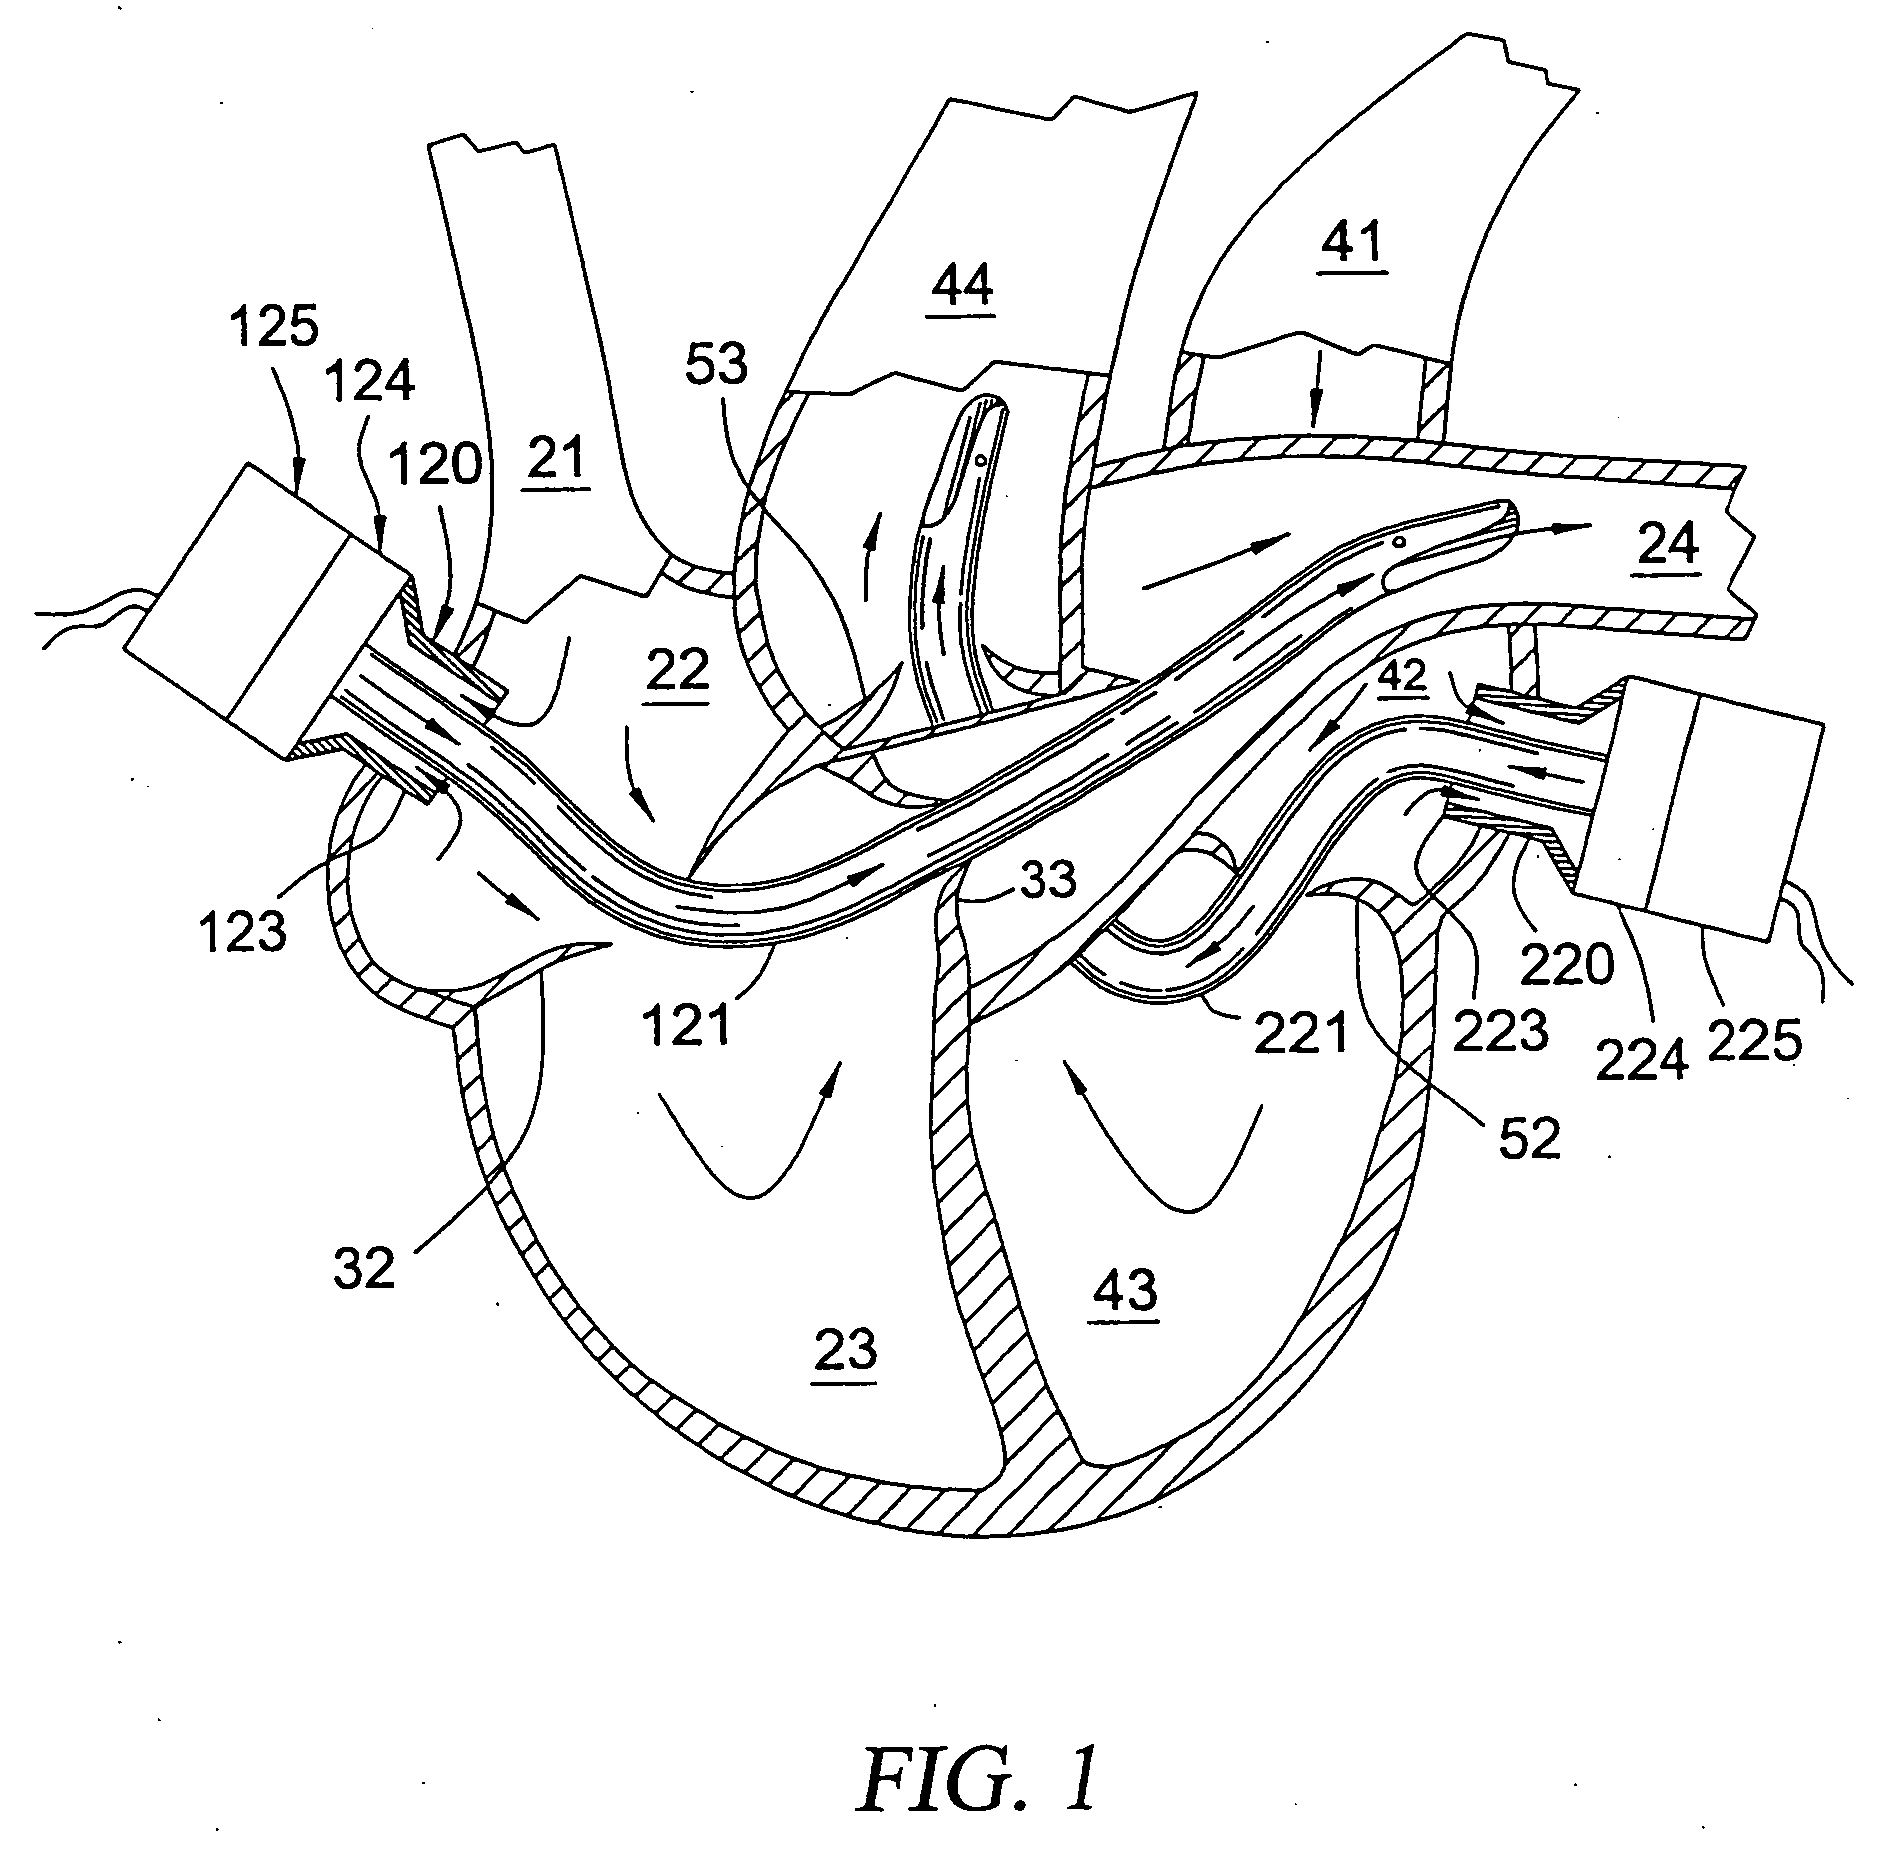 Pulmonary and circulatory blood flow support devices and methods for heart surgery procedures